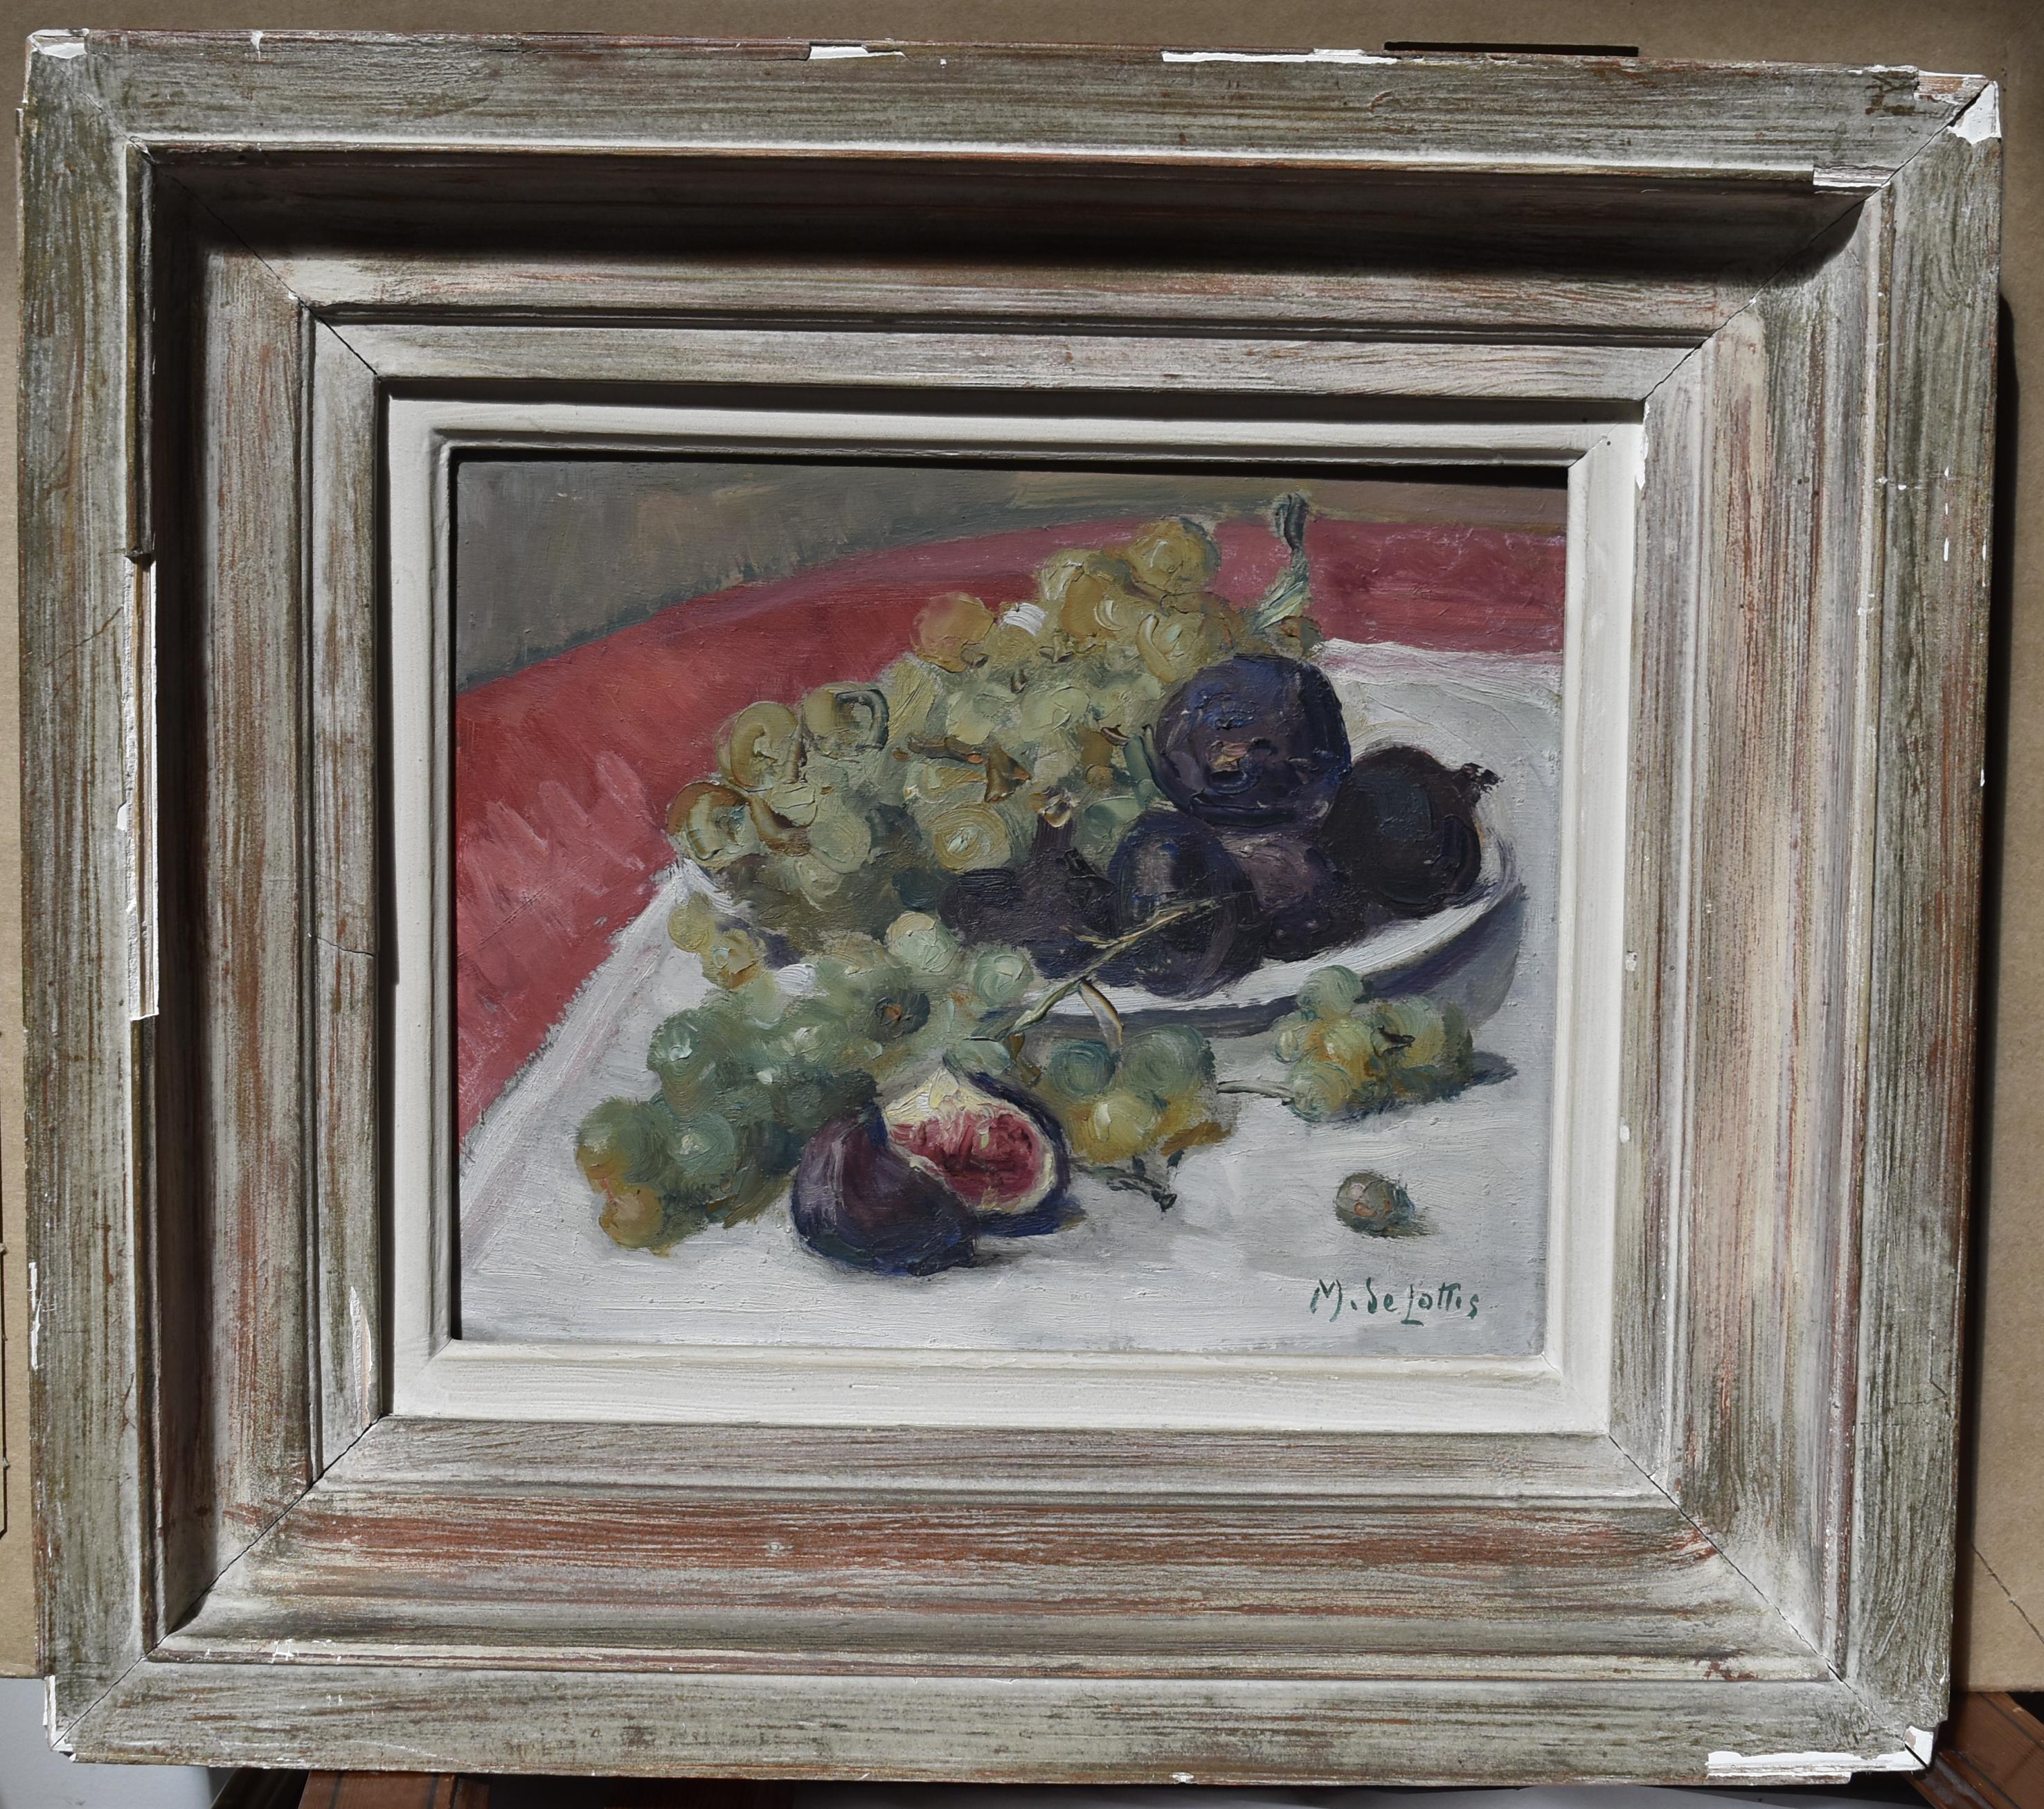 Marguerite De Lottis, Still Life with grapes and figs, Oil on wooden panel 4